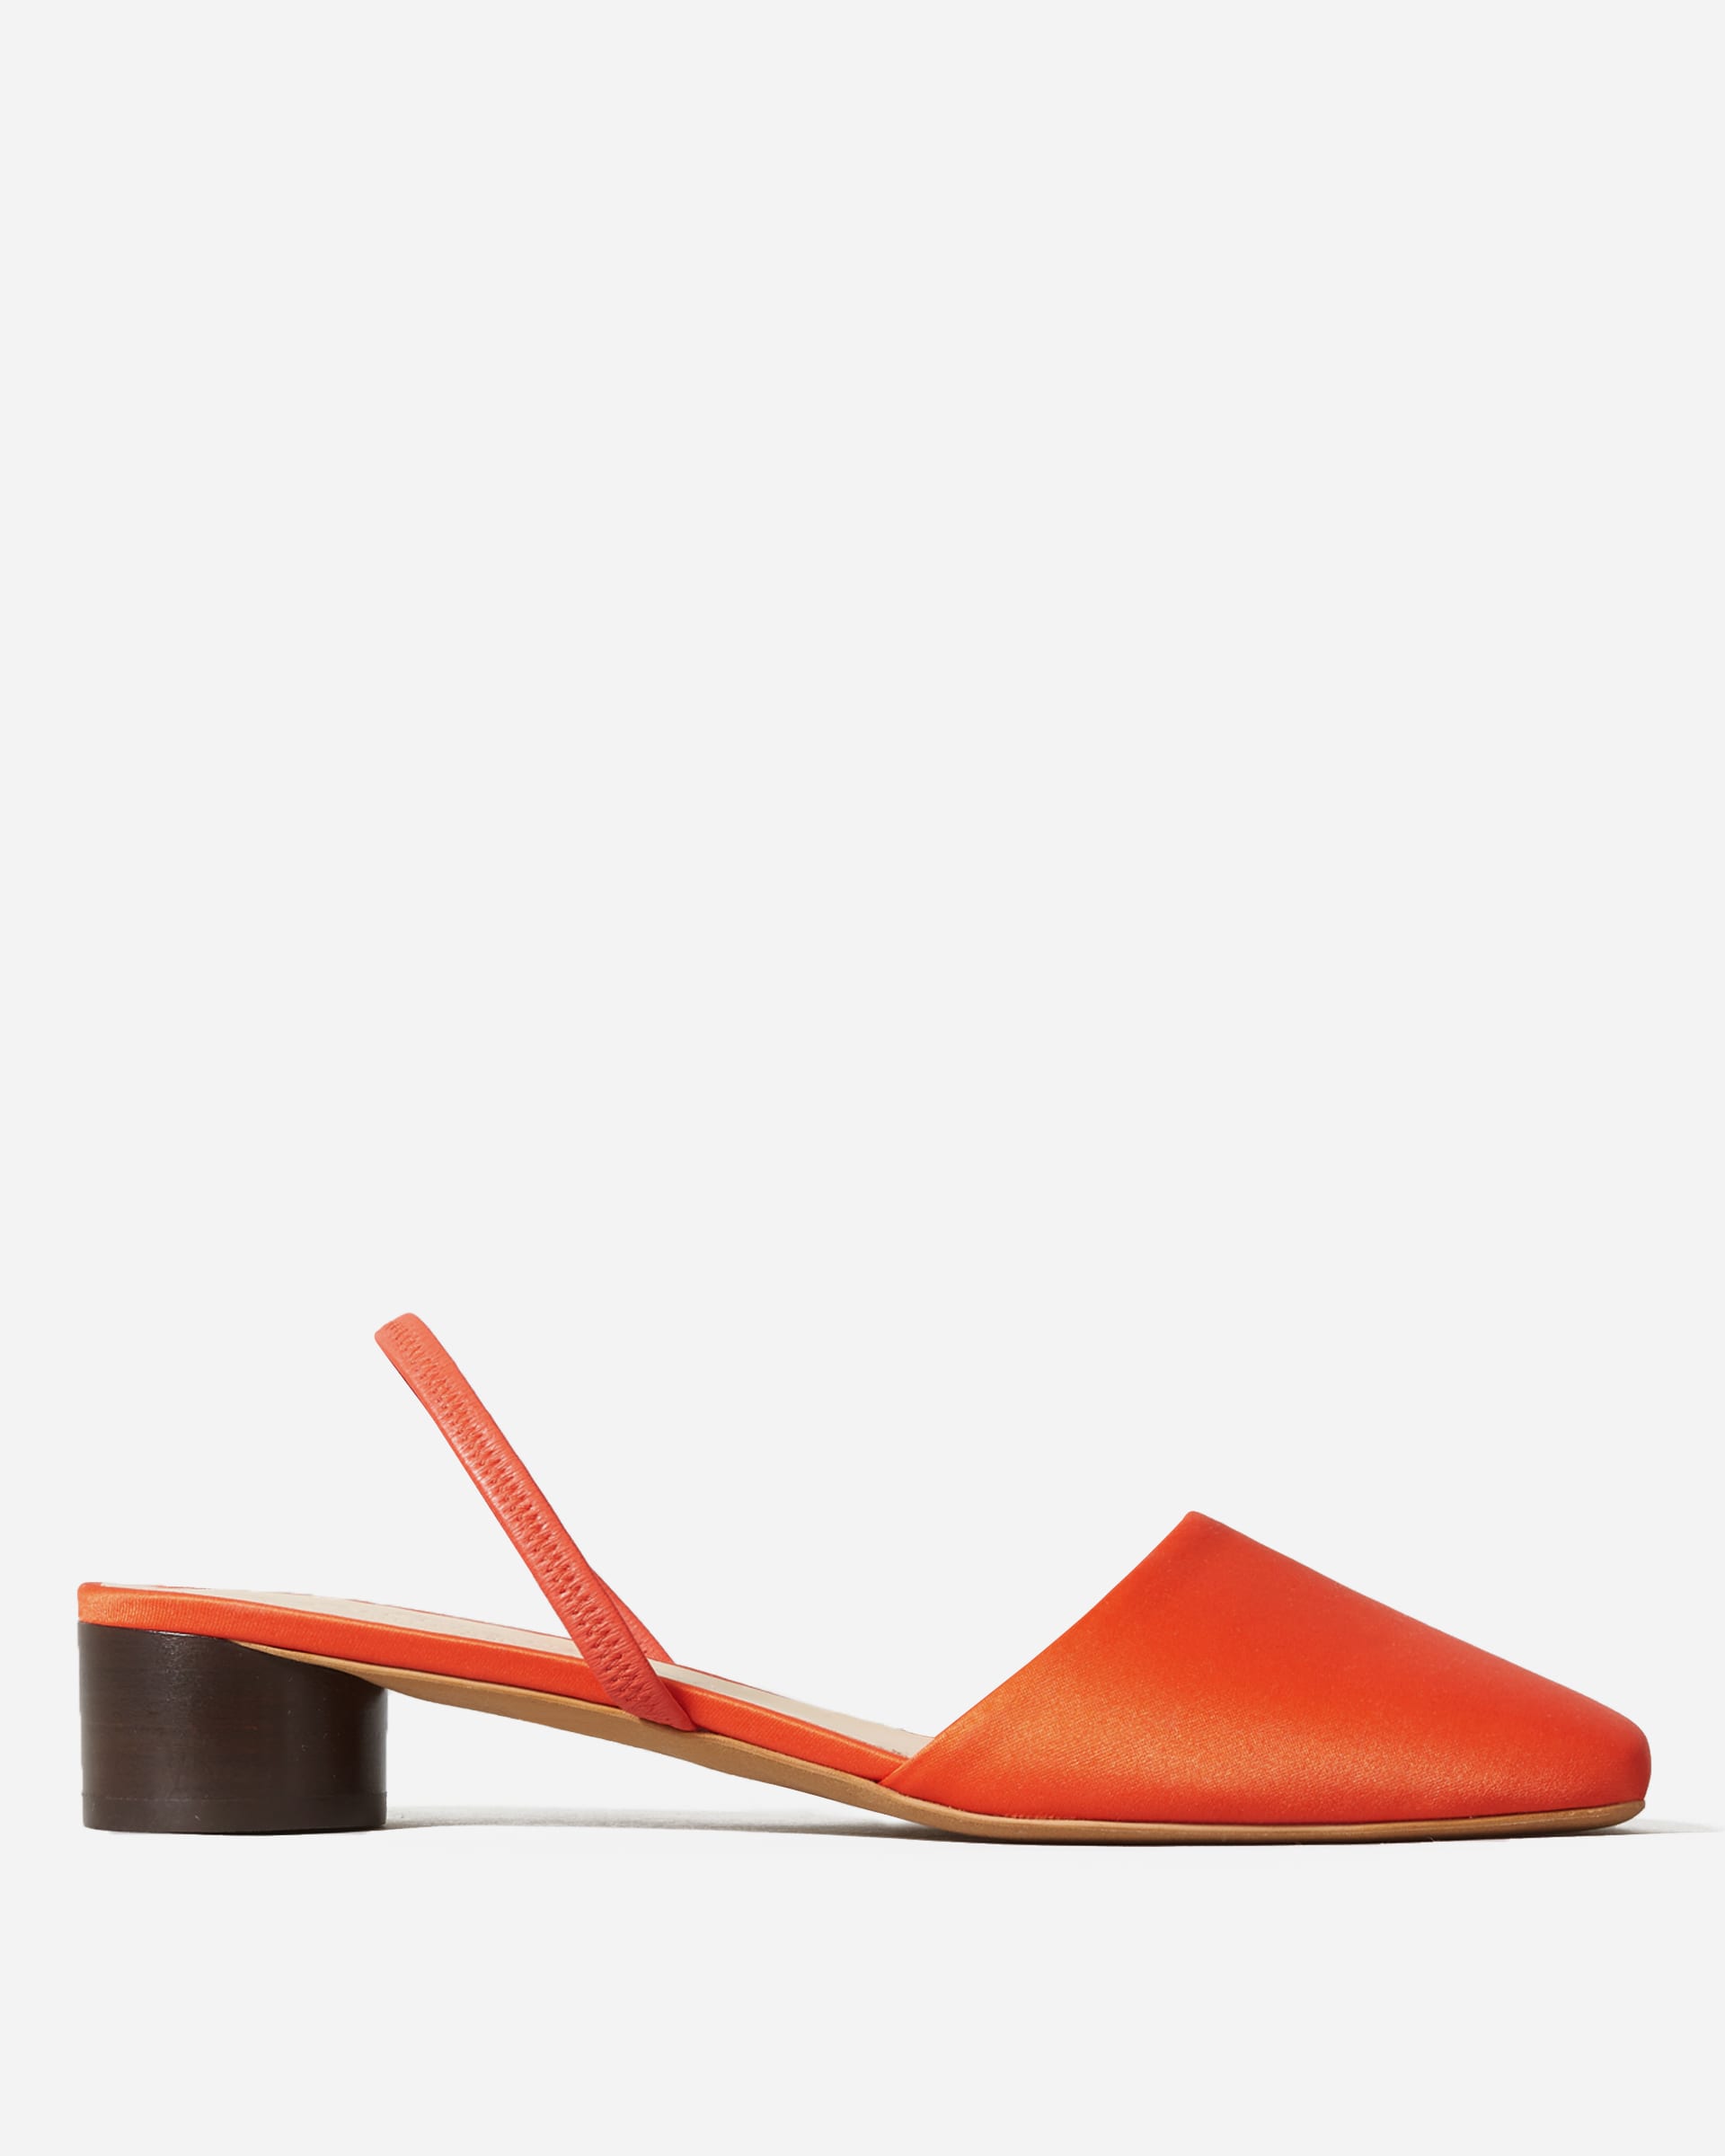 The Tapered Square Toe Slingback Bright Red Satin – Everlane